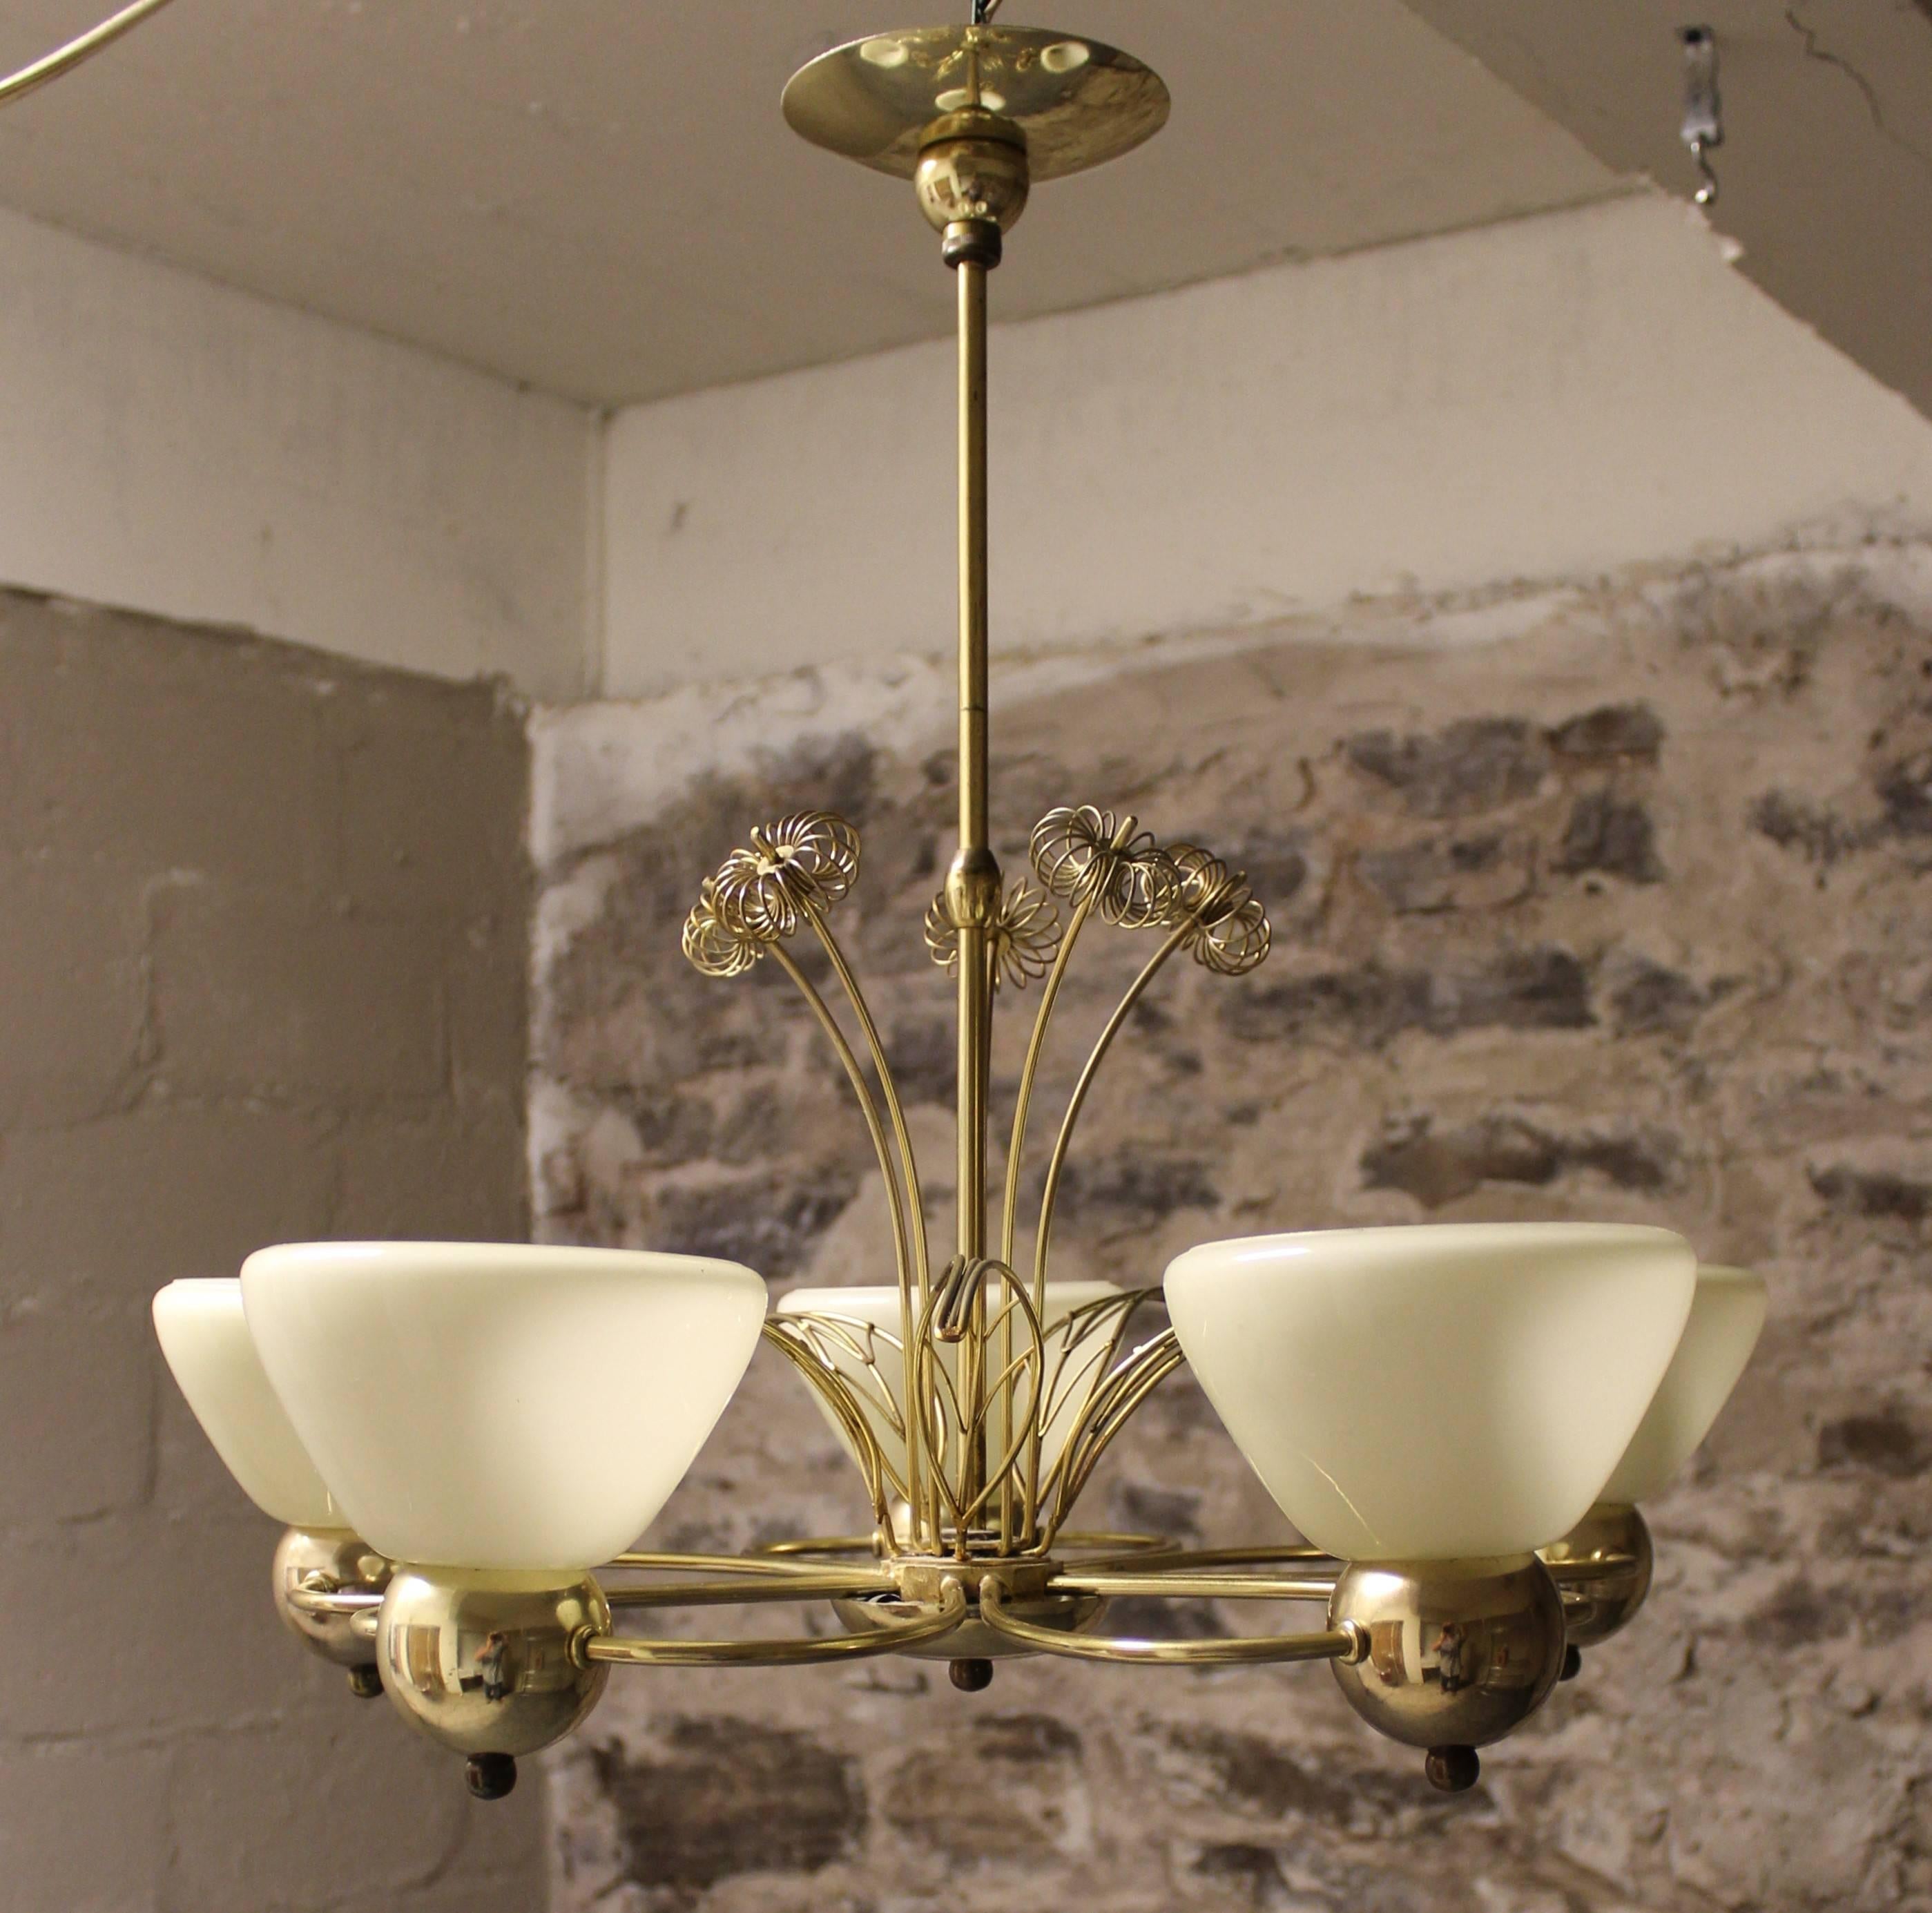 Paavo Tynell five-arm chandelier with brass flowers and leaves emerging from the center.